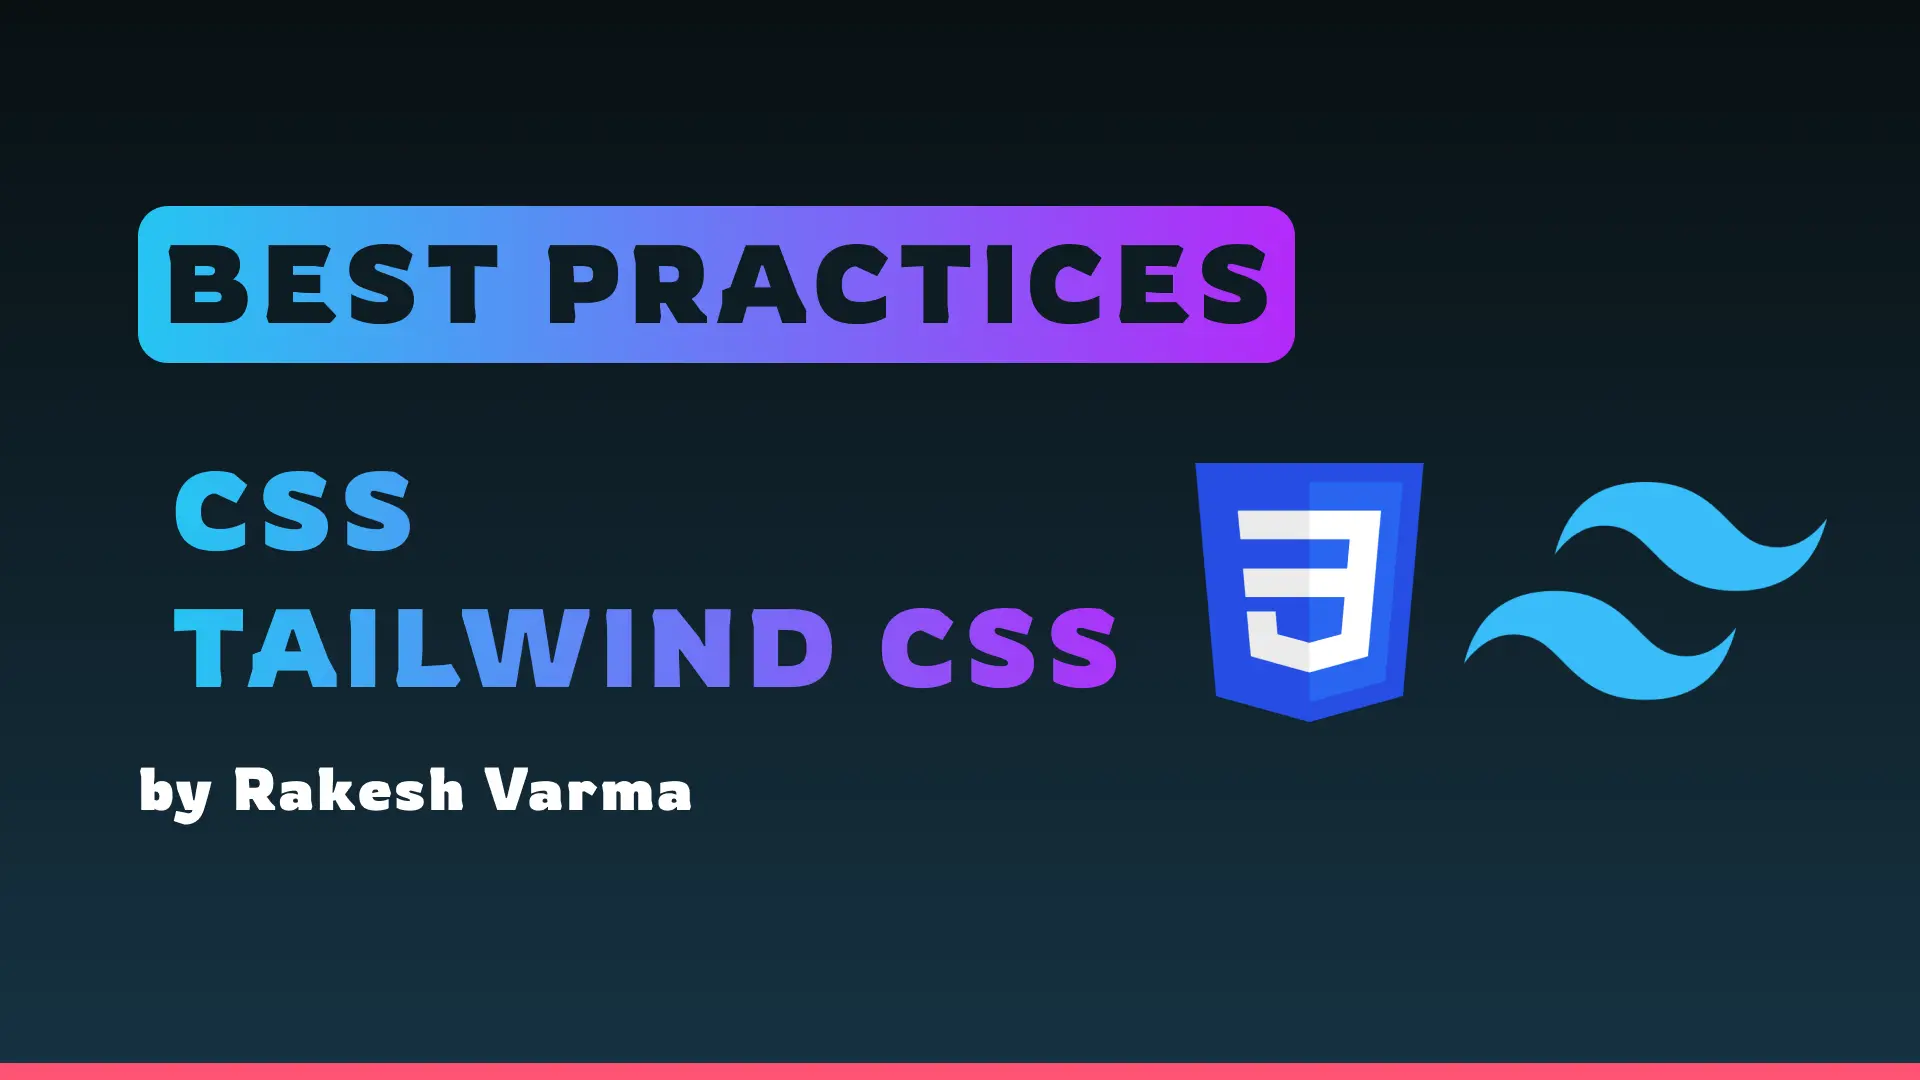 Best Practices for CSS and Tailwind CSS